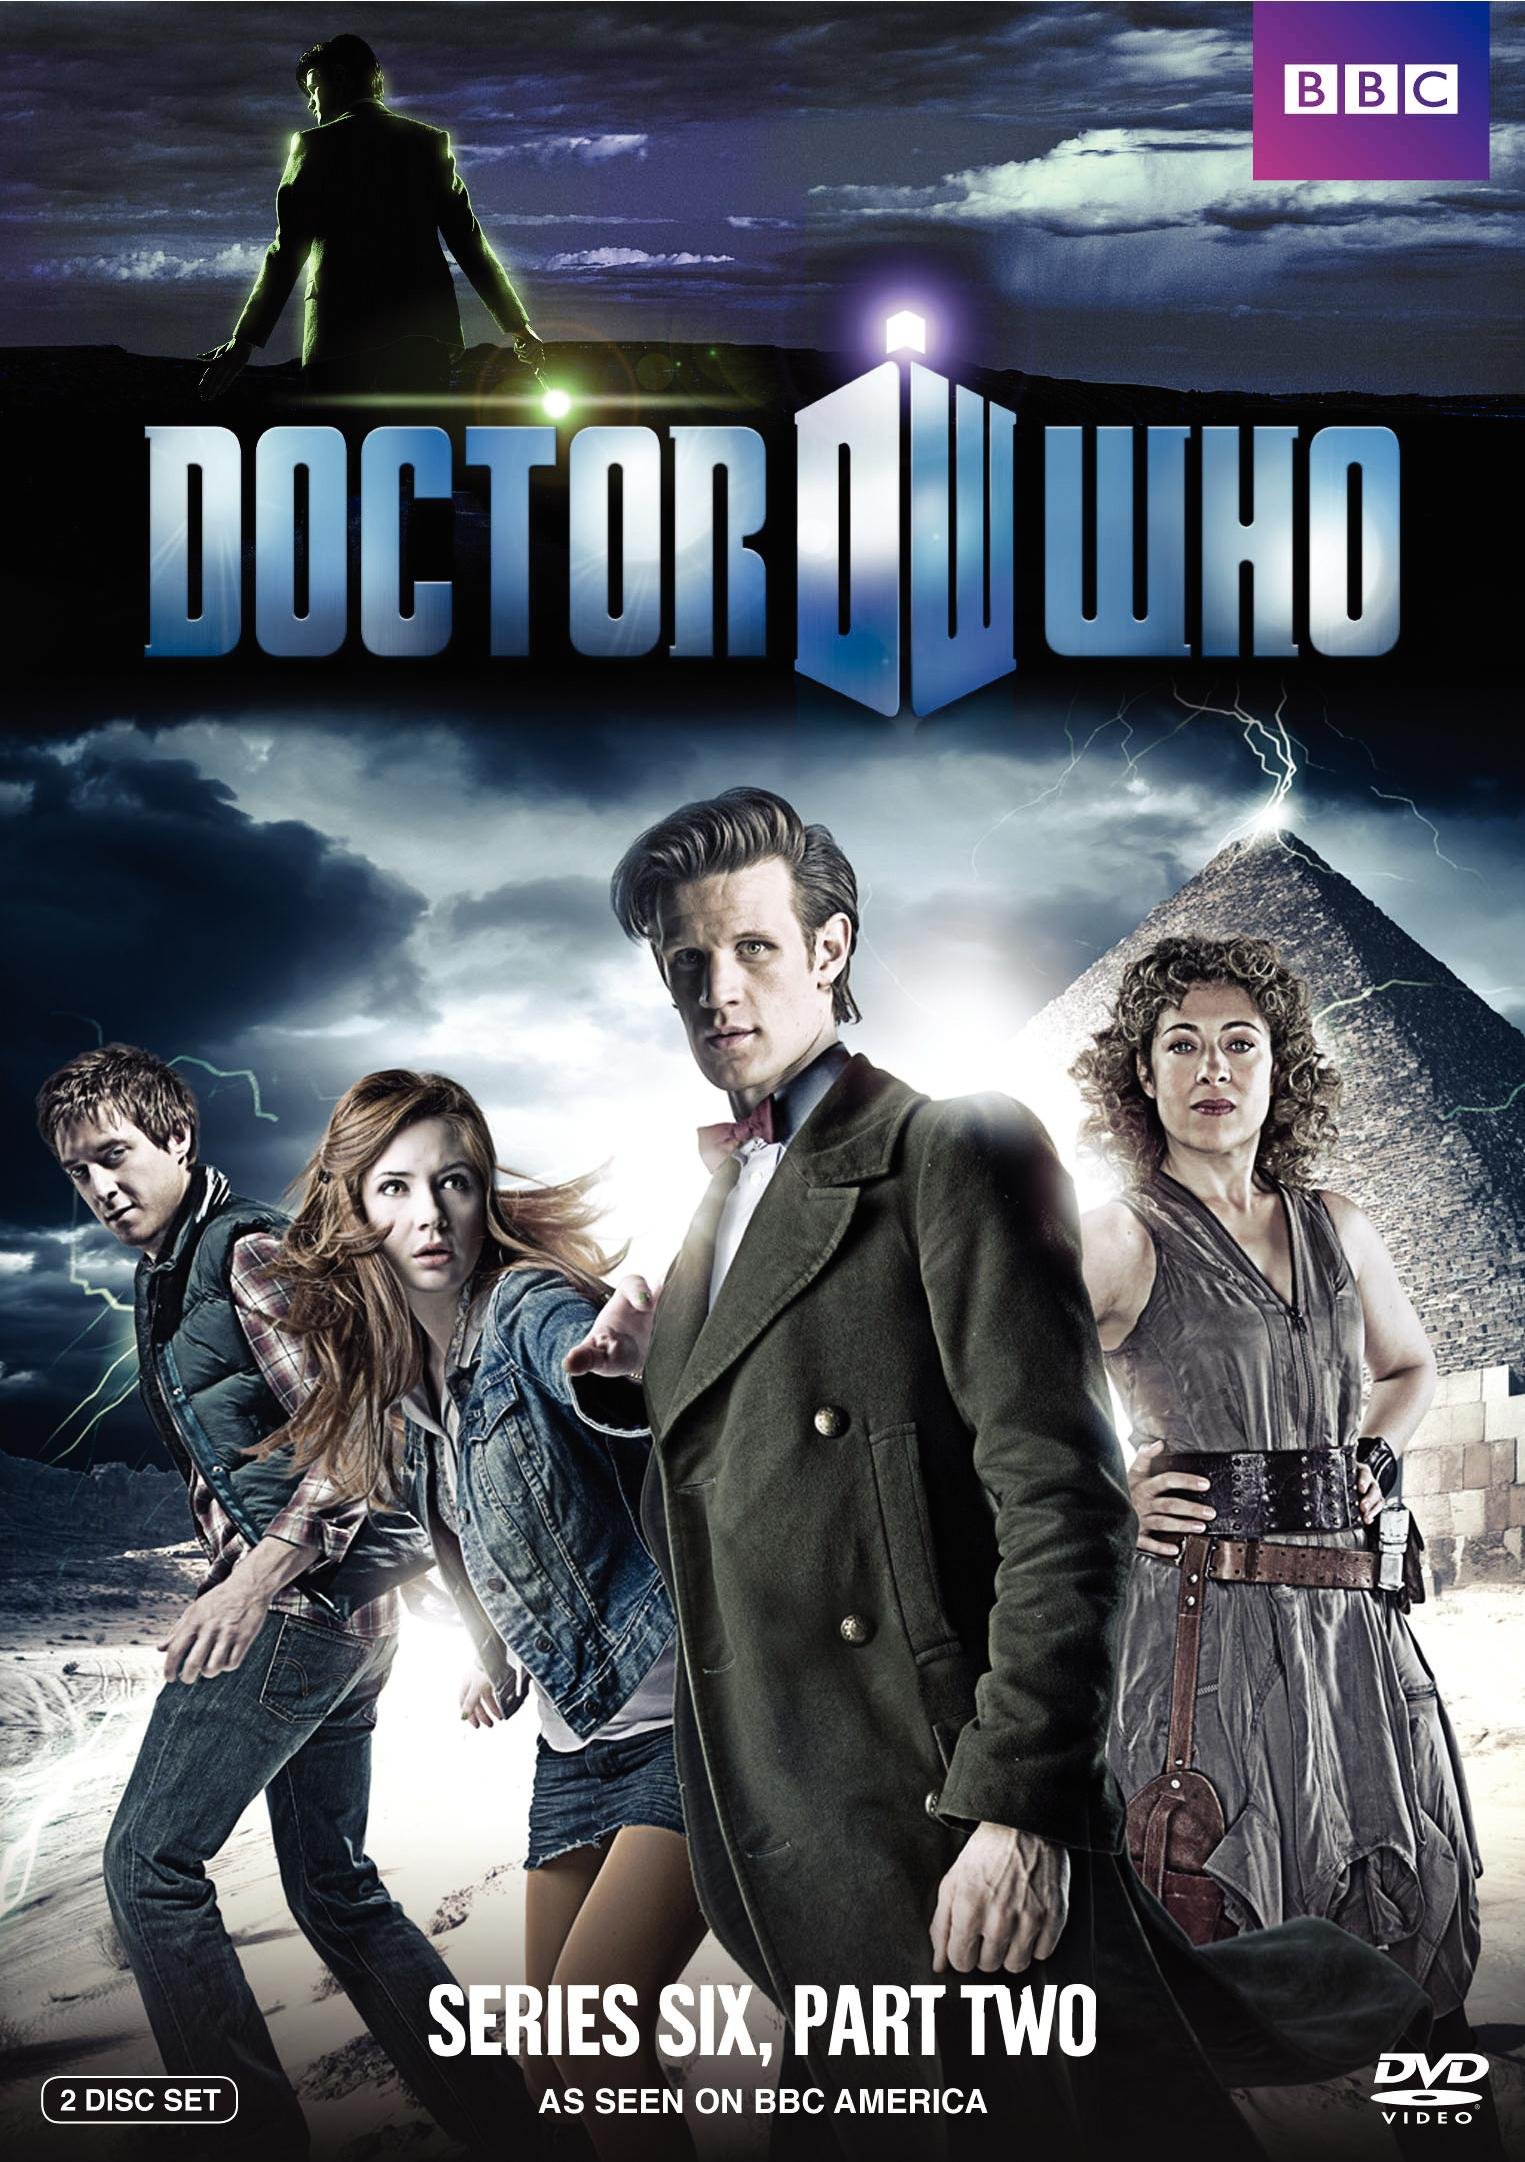 doctor-who-the-sixth-series-part-2-dvd-cover-71.jpg